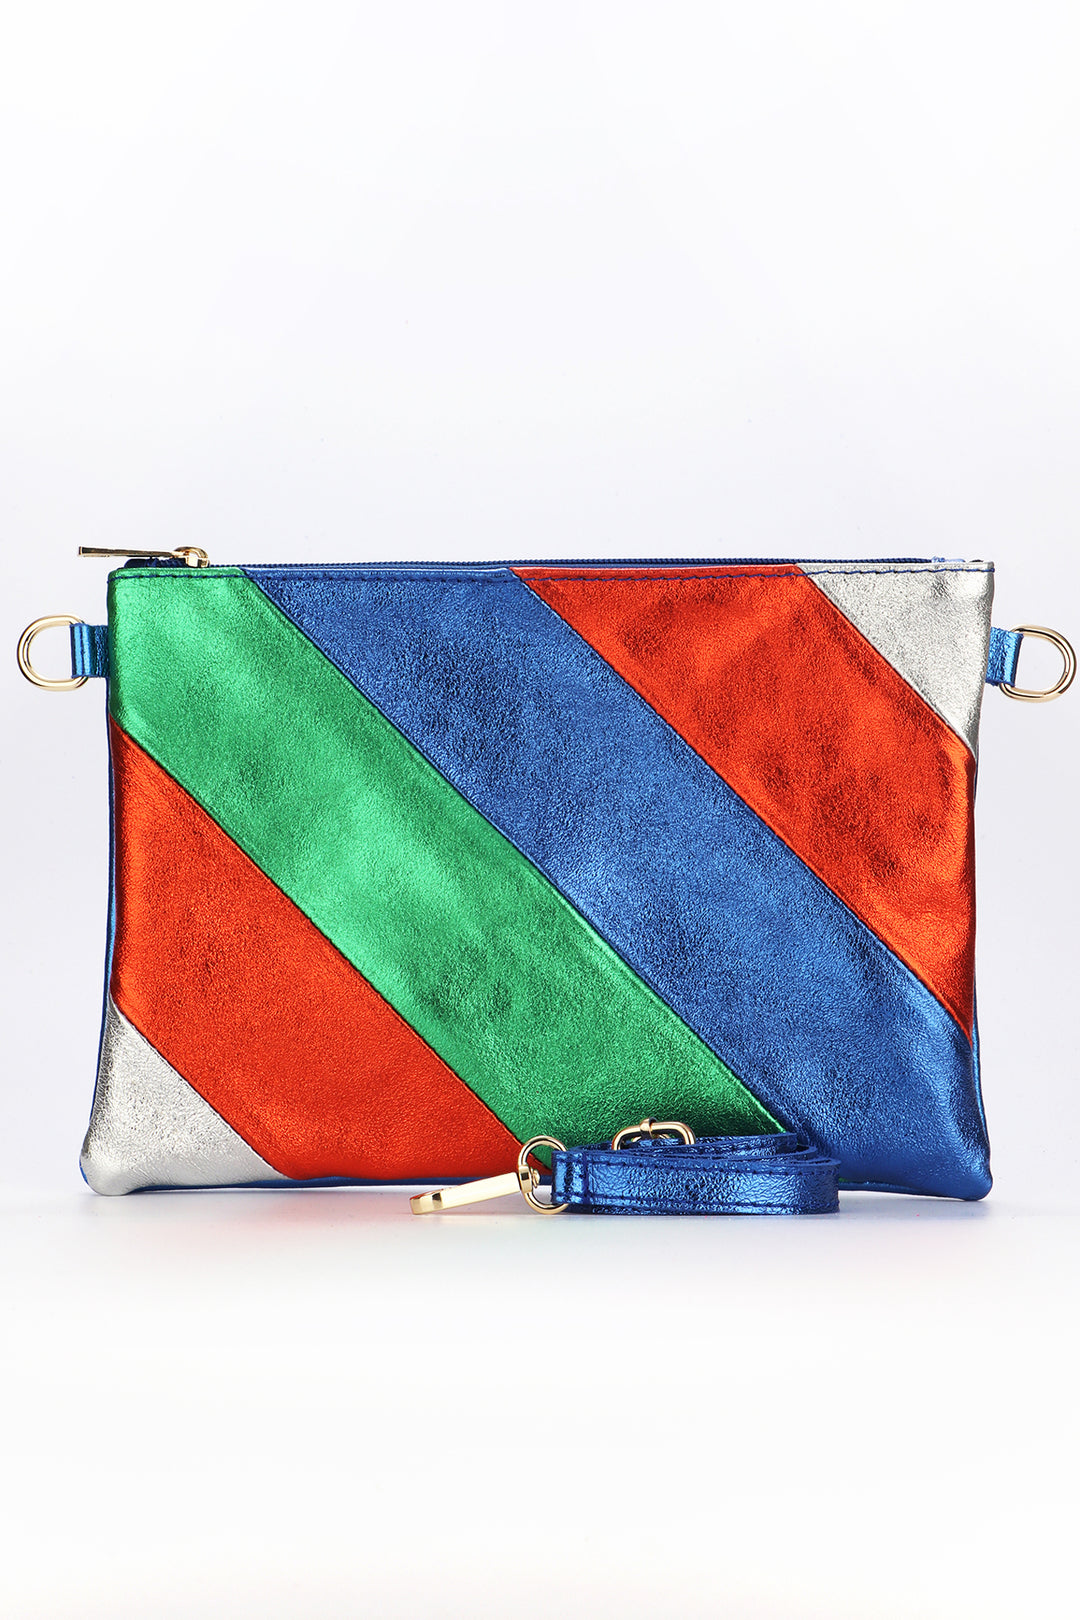 metallic striped clutch bag in silver, orange, blue and green with a detachable blue cross body strap